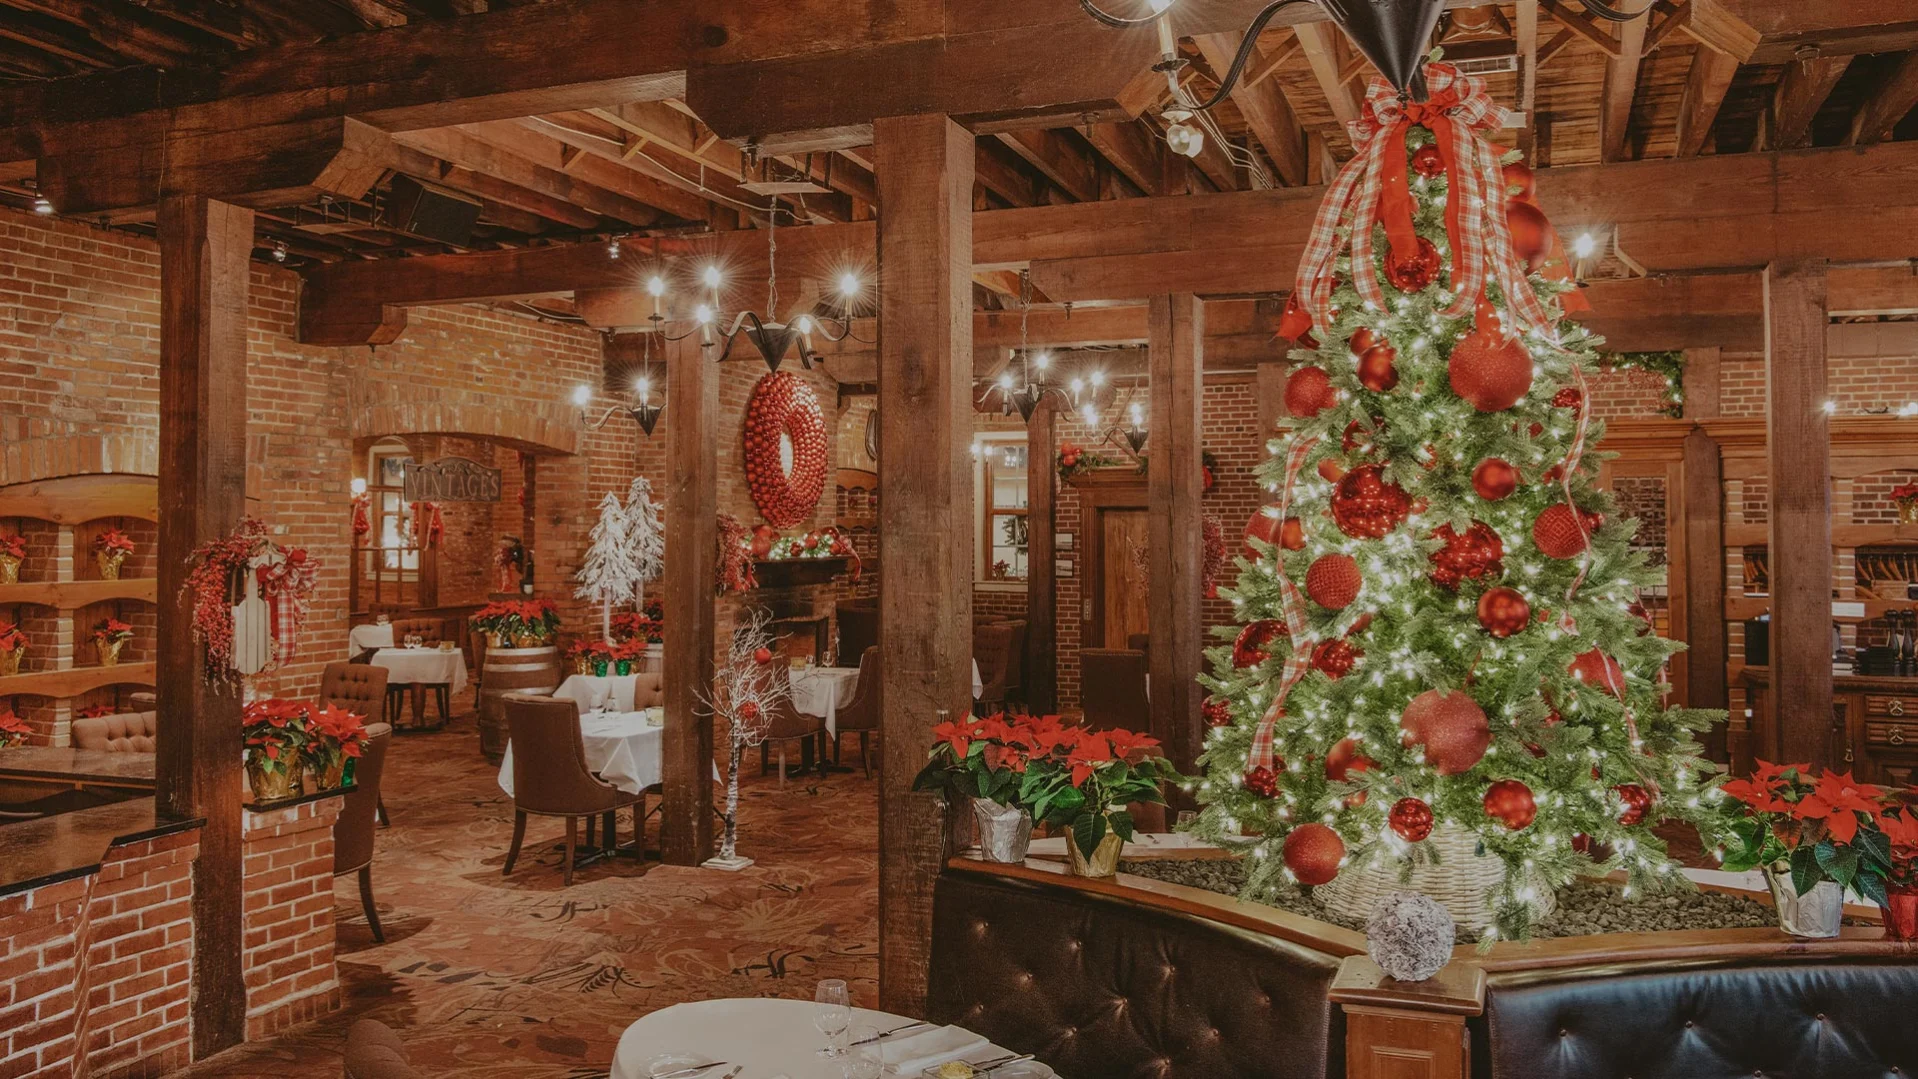 Christmas décor throughout The Cannery restaurant in Niagara-on-the-Lake.